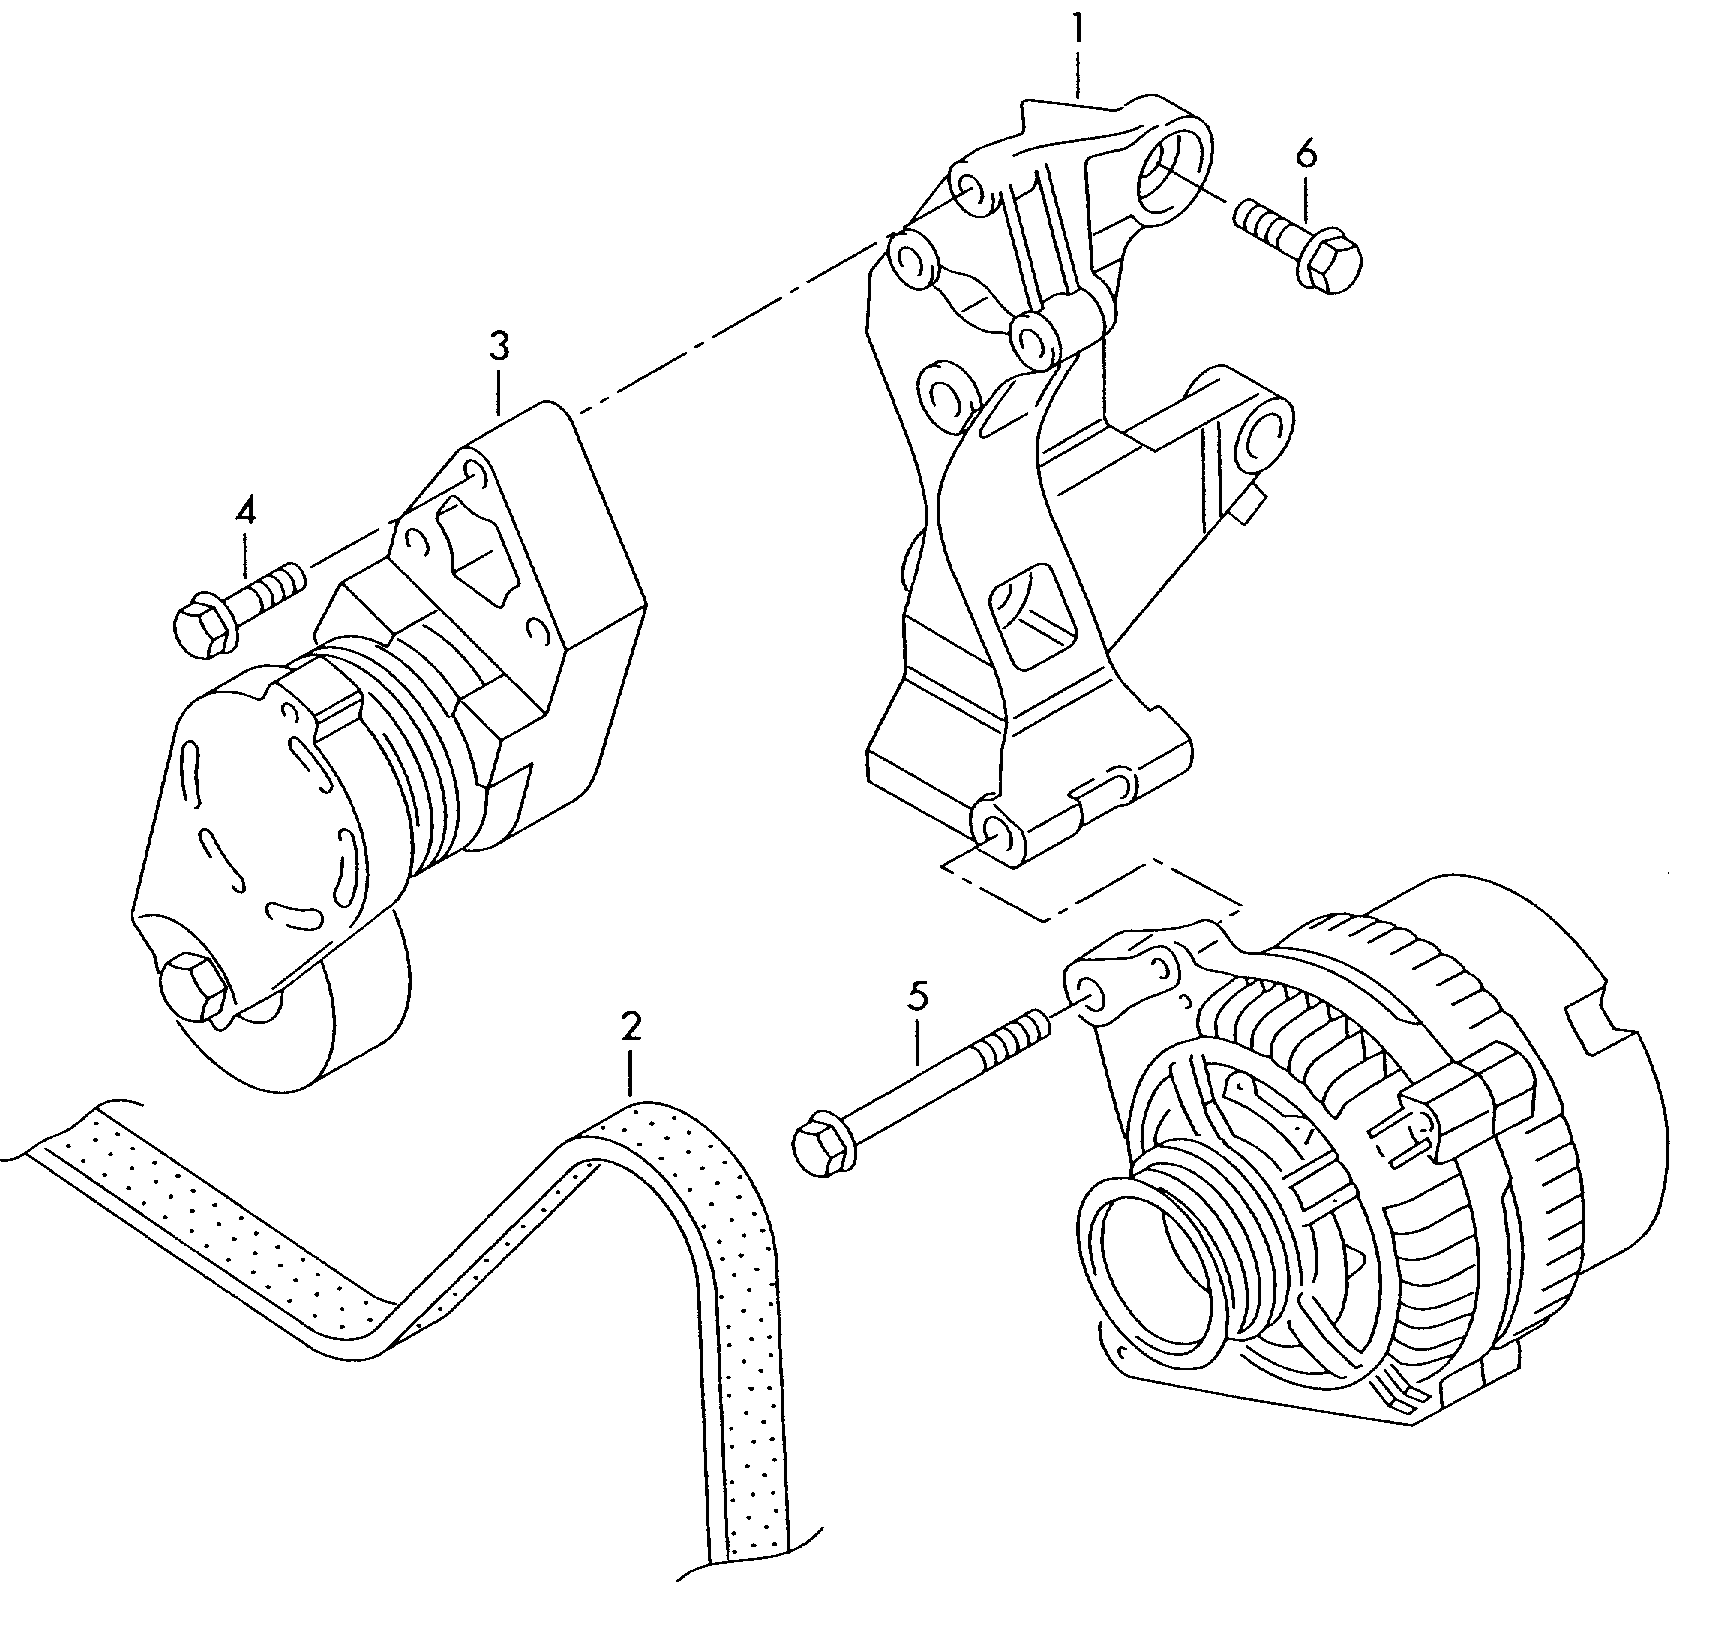 connecting and mounting parts<br>for alternatorPoly-V-belt 1.2 Ltr.1.4ltr. - Lupo / Lupo 3L TDI - lu